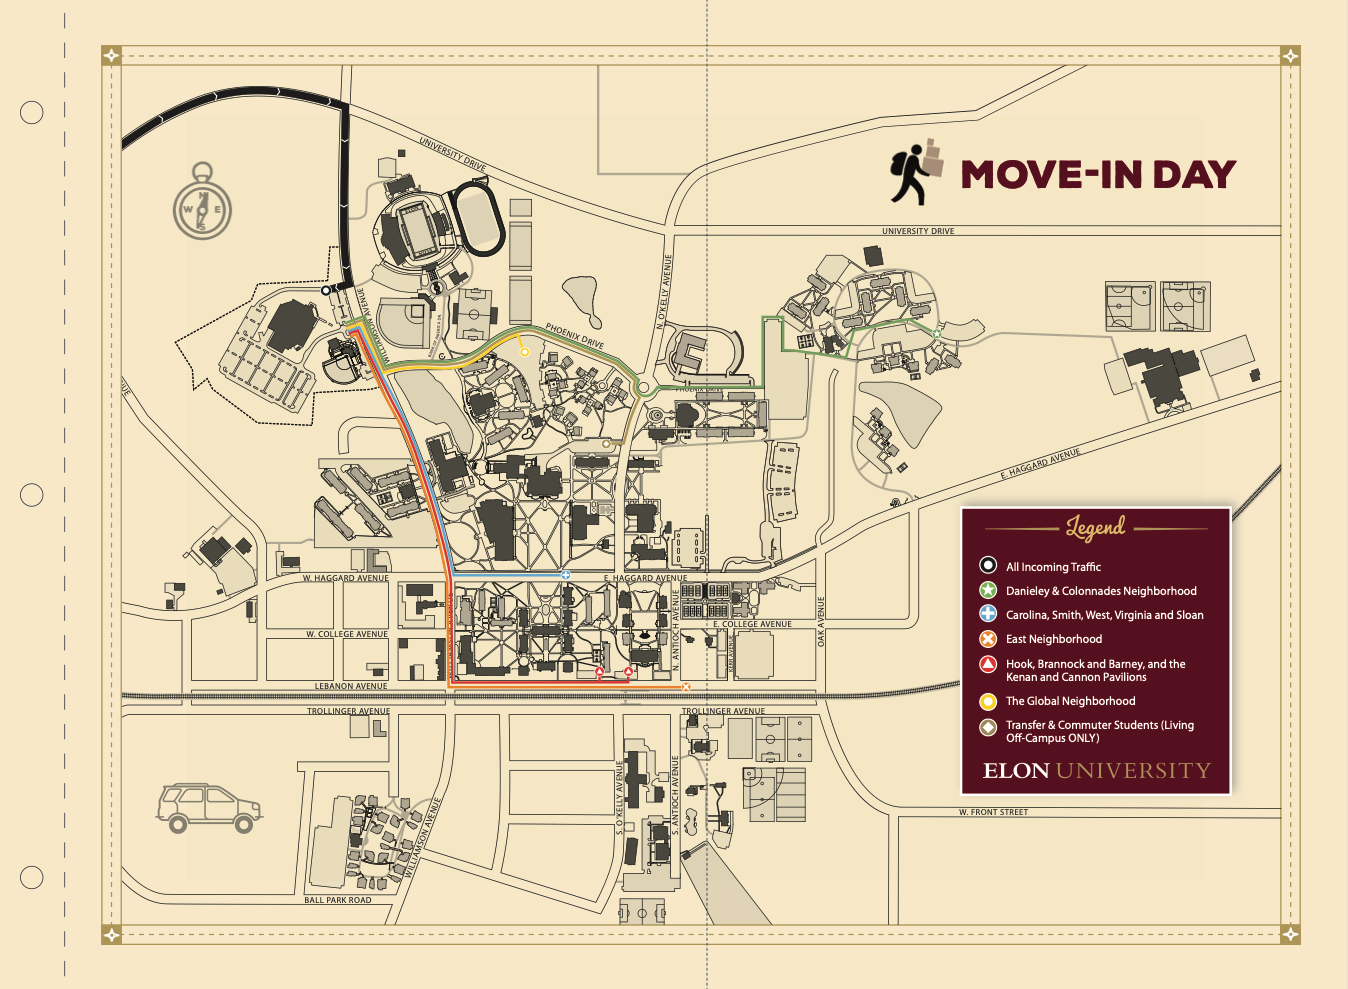 2023 Move-in Day traffic map